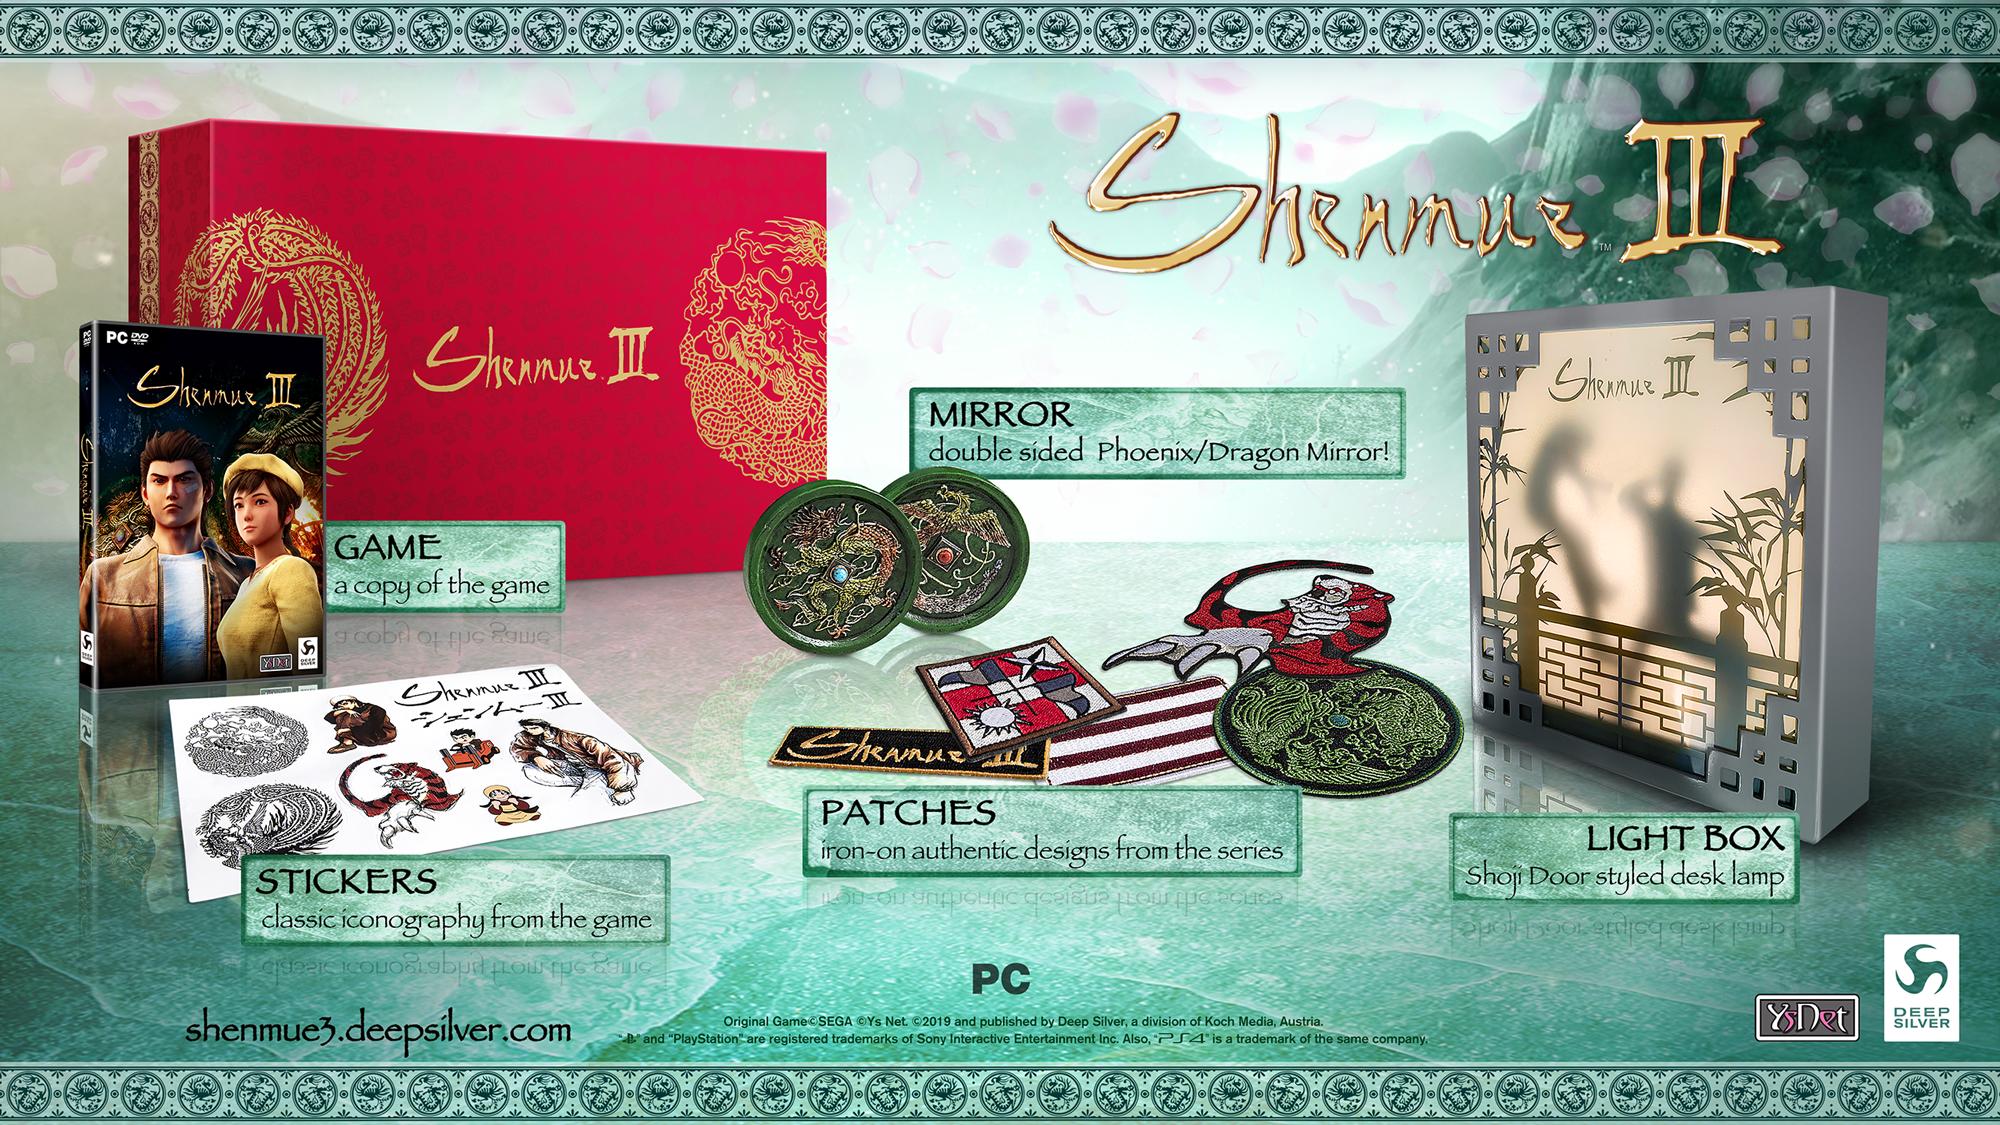 Shenmue III Limited Run Physical Collectors Edition